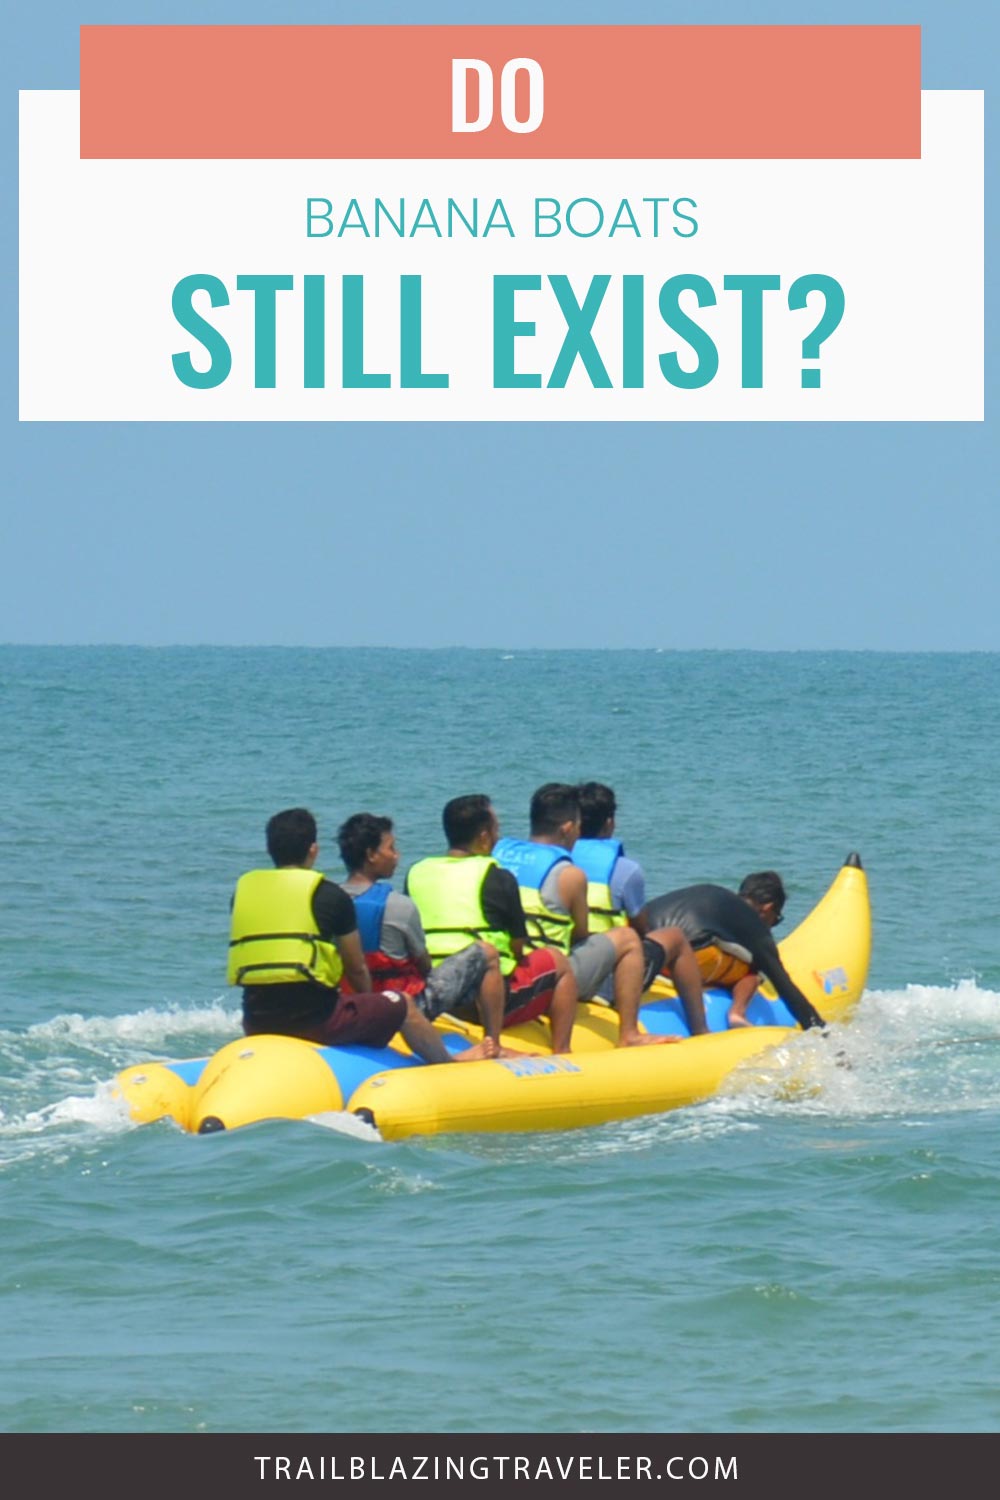 People on a banana boat - do they still exist?